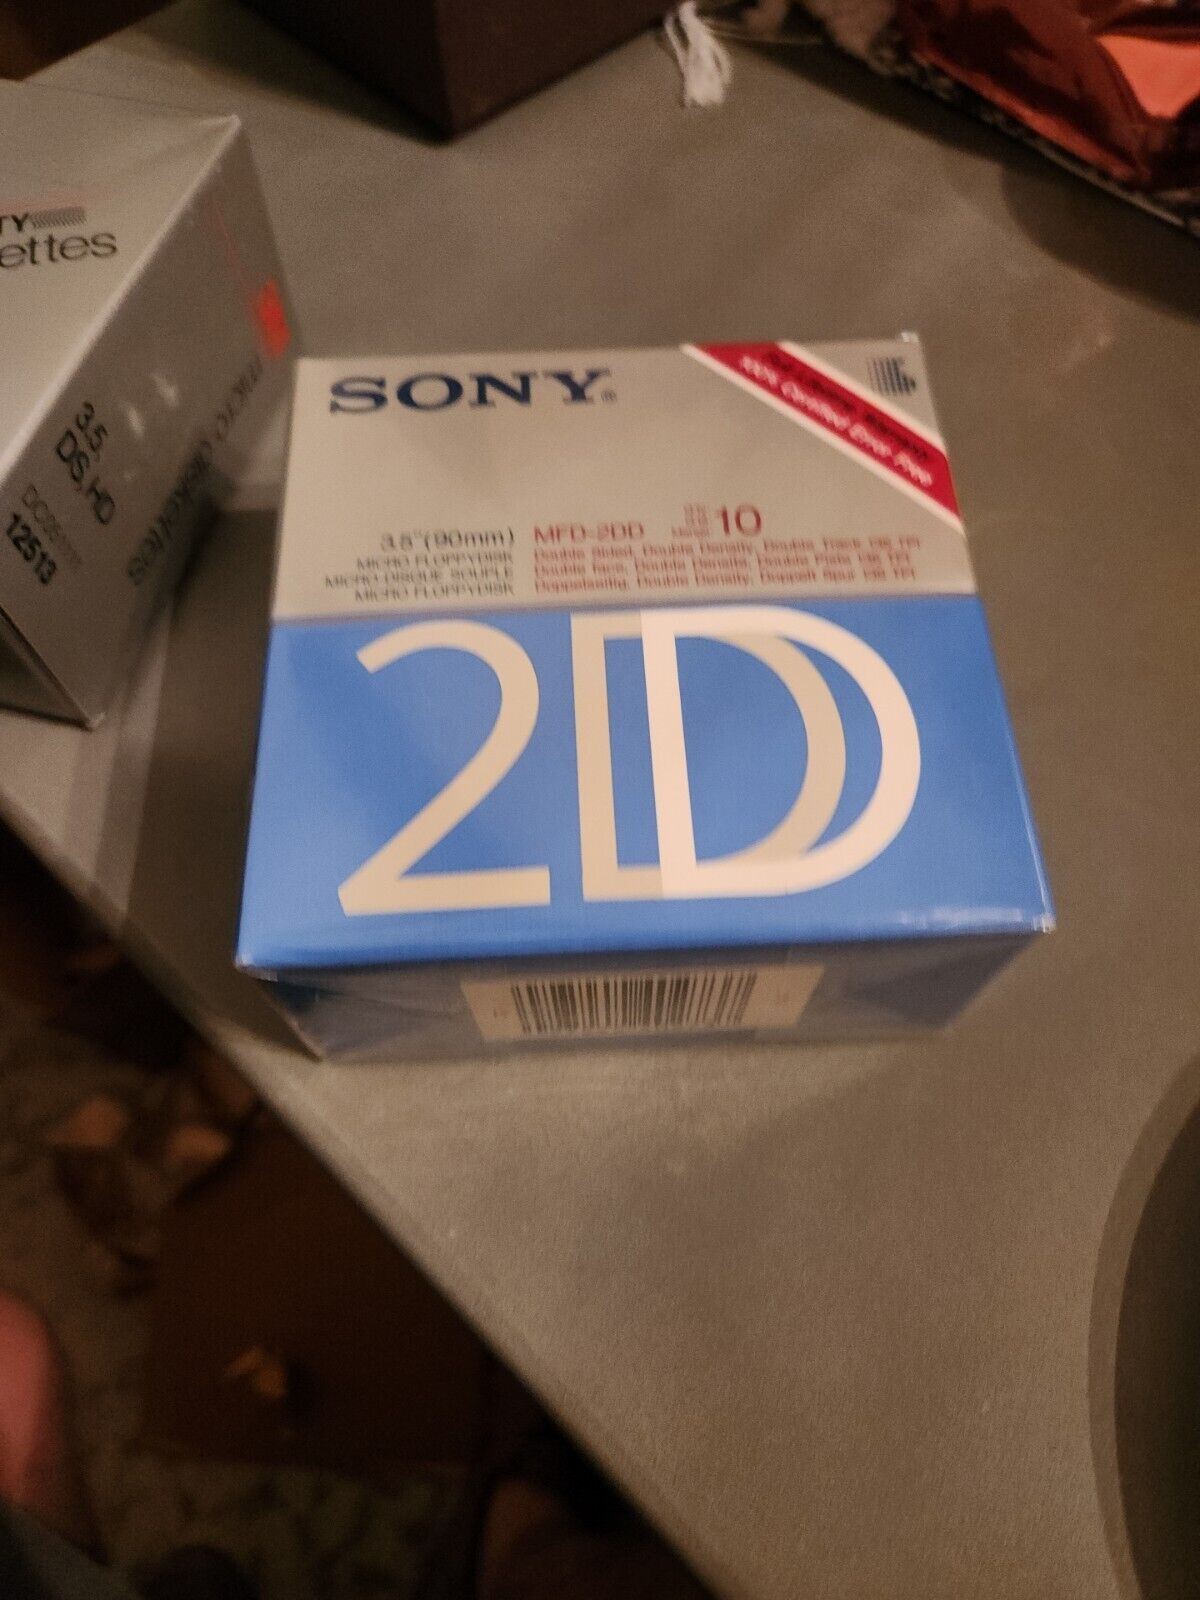 Sony MFD 2DD 3.5 Inch Micro Floppydisk Double Density 10 Pack 1MB New in Box